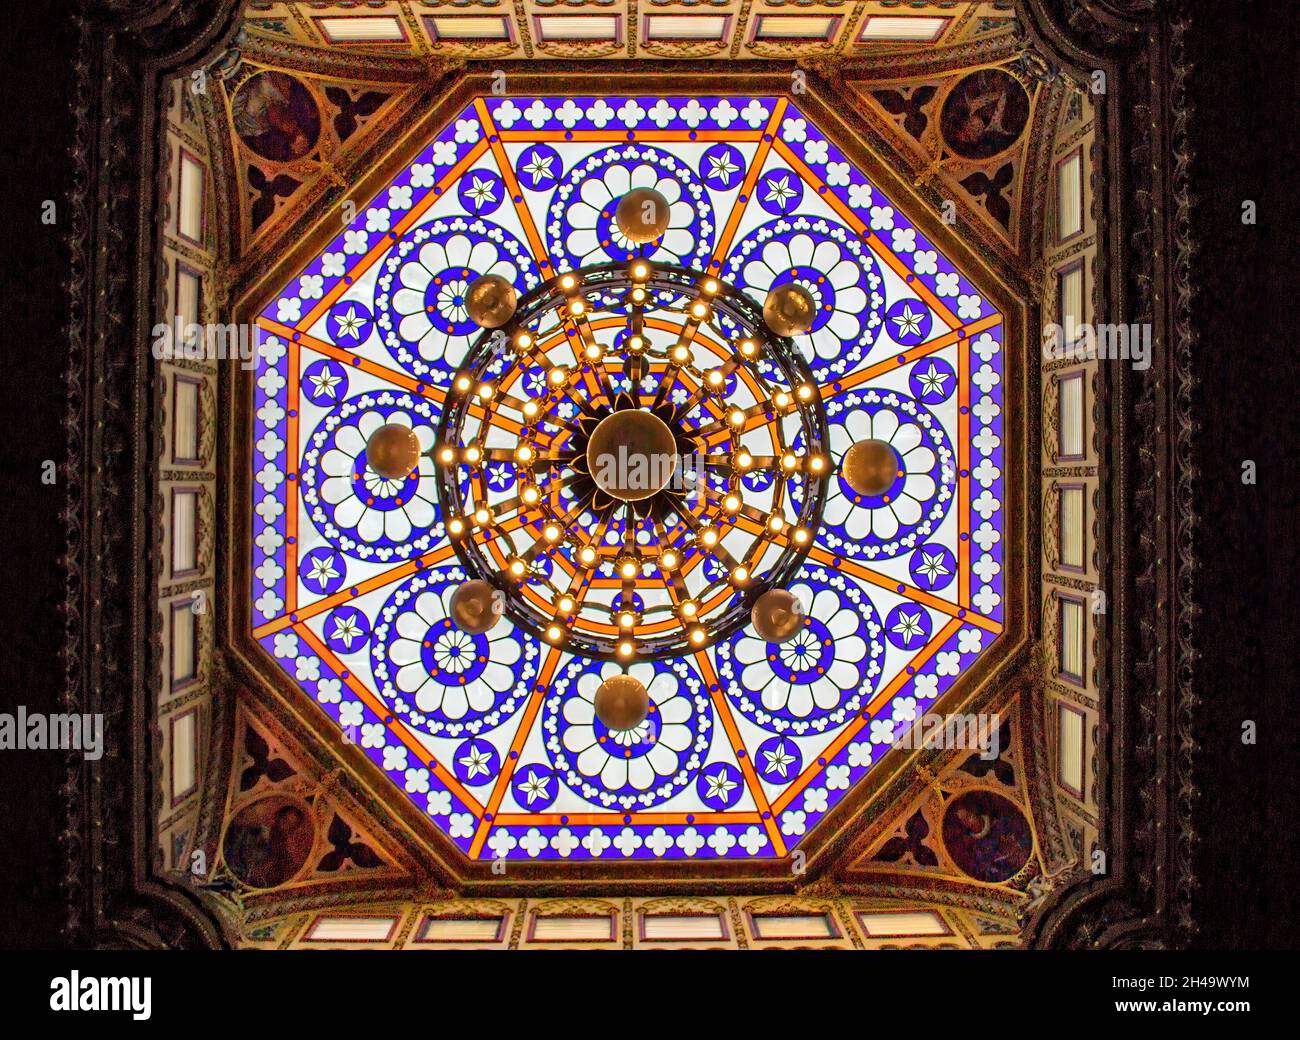 Stained glass skylight in the ceiling of the Real Gabinete Portuguez de Leitura in Rio de Janeiro, Brazil. The old building is a public library and al Stock Photo